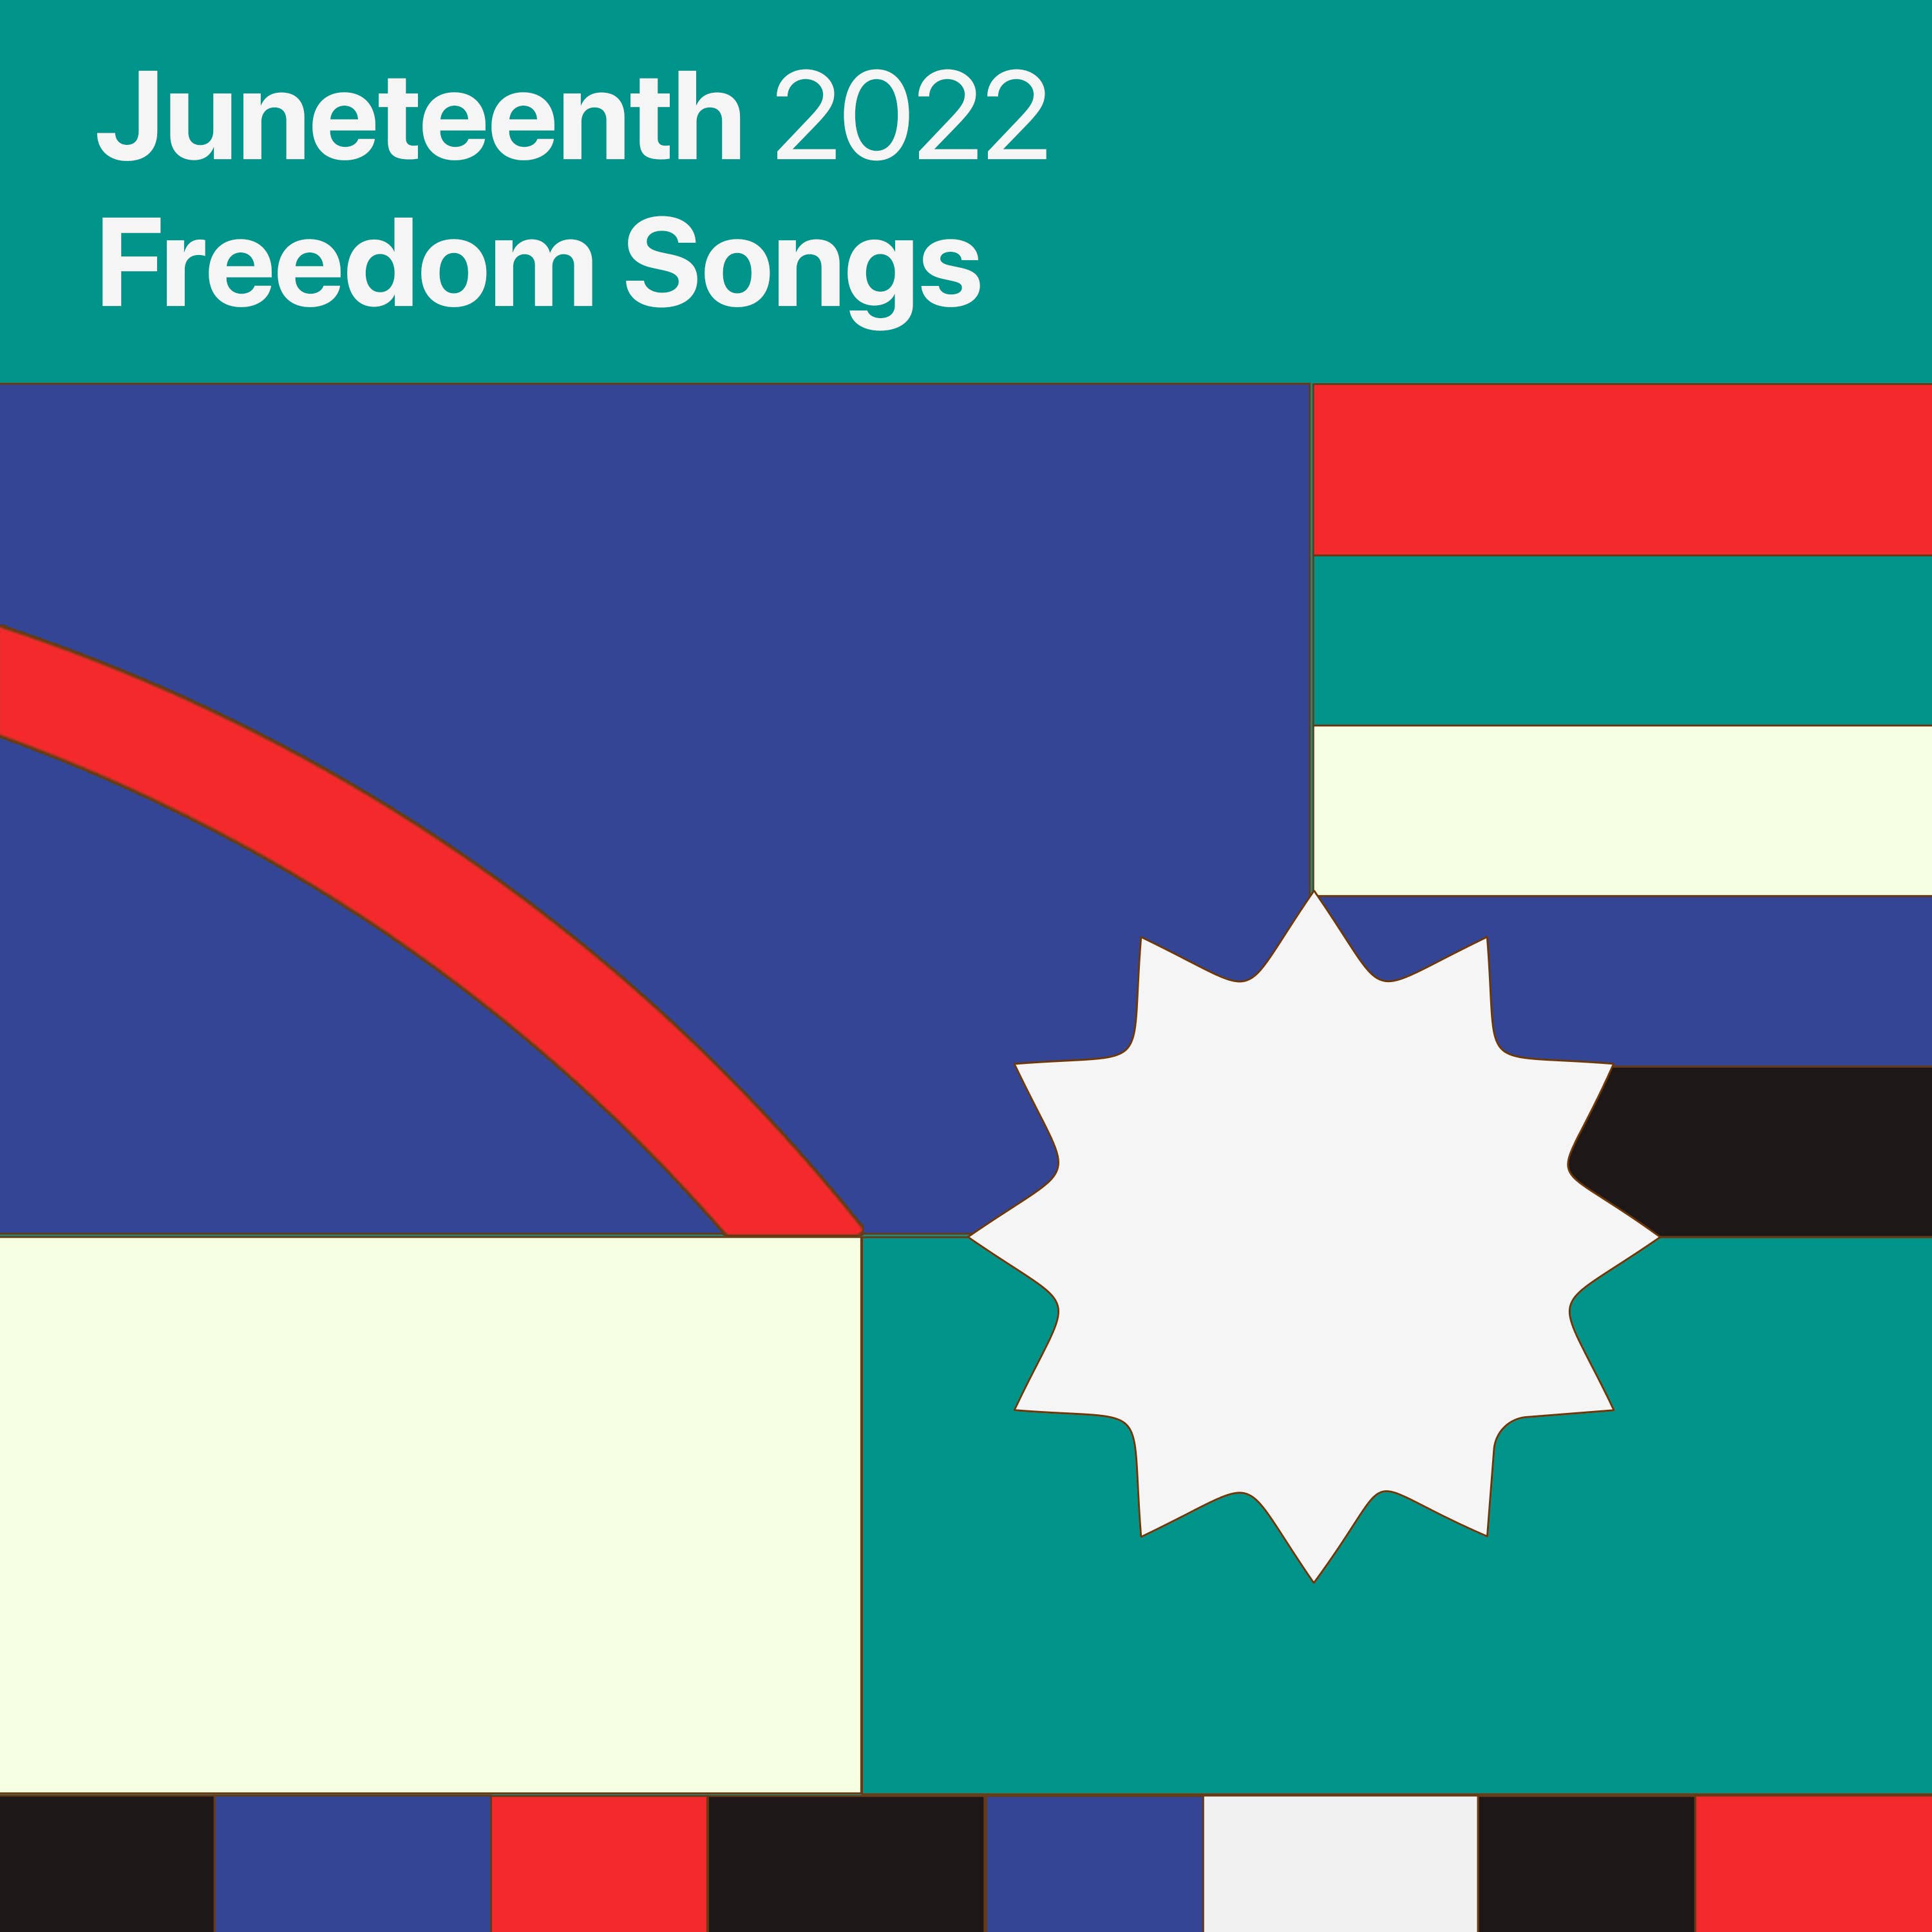 The cover art to the new Apple Music compilation 'Juneteenth 2022: Freedom Songs'